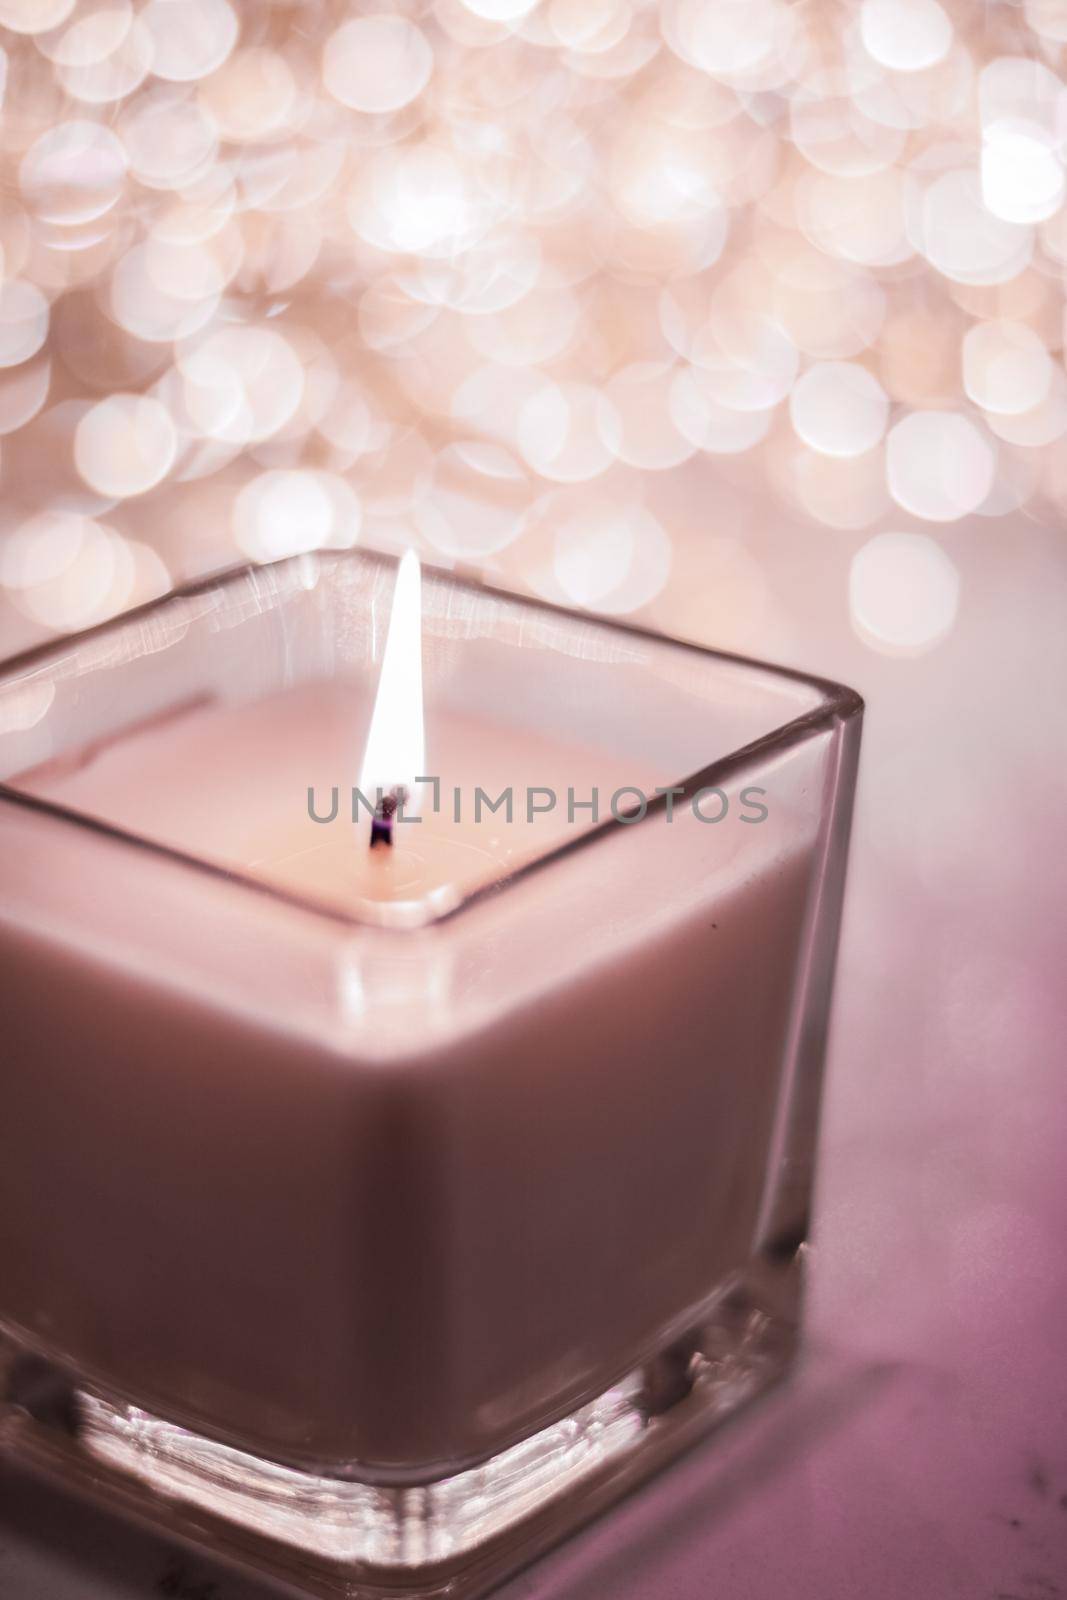 Festive decoration, branding and aromatherapy spa concept - Chocolate aromatic candle on Christmas and New Years glitter background, Valentines Day luxury home decor and holiday season brand design